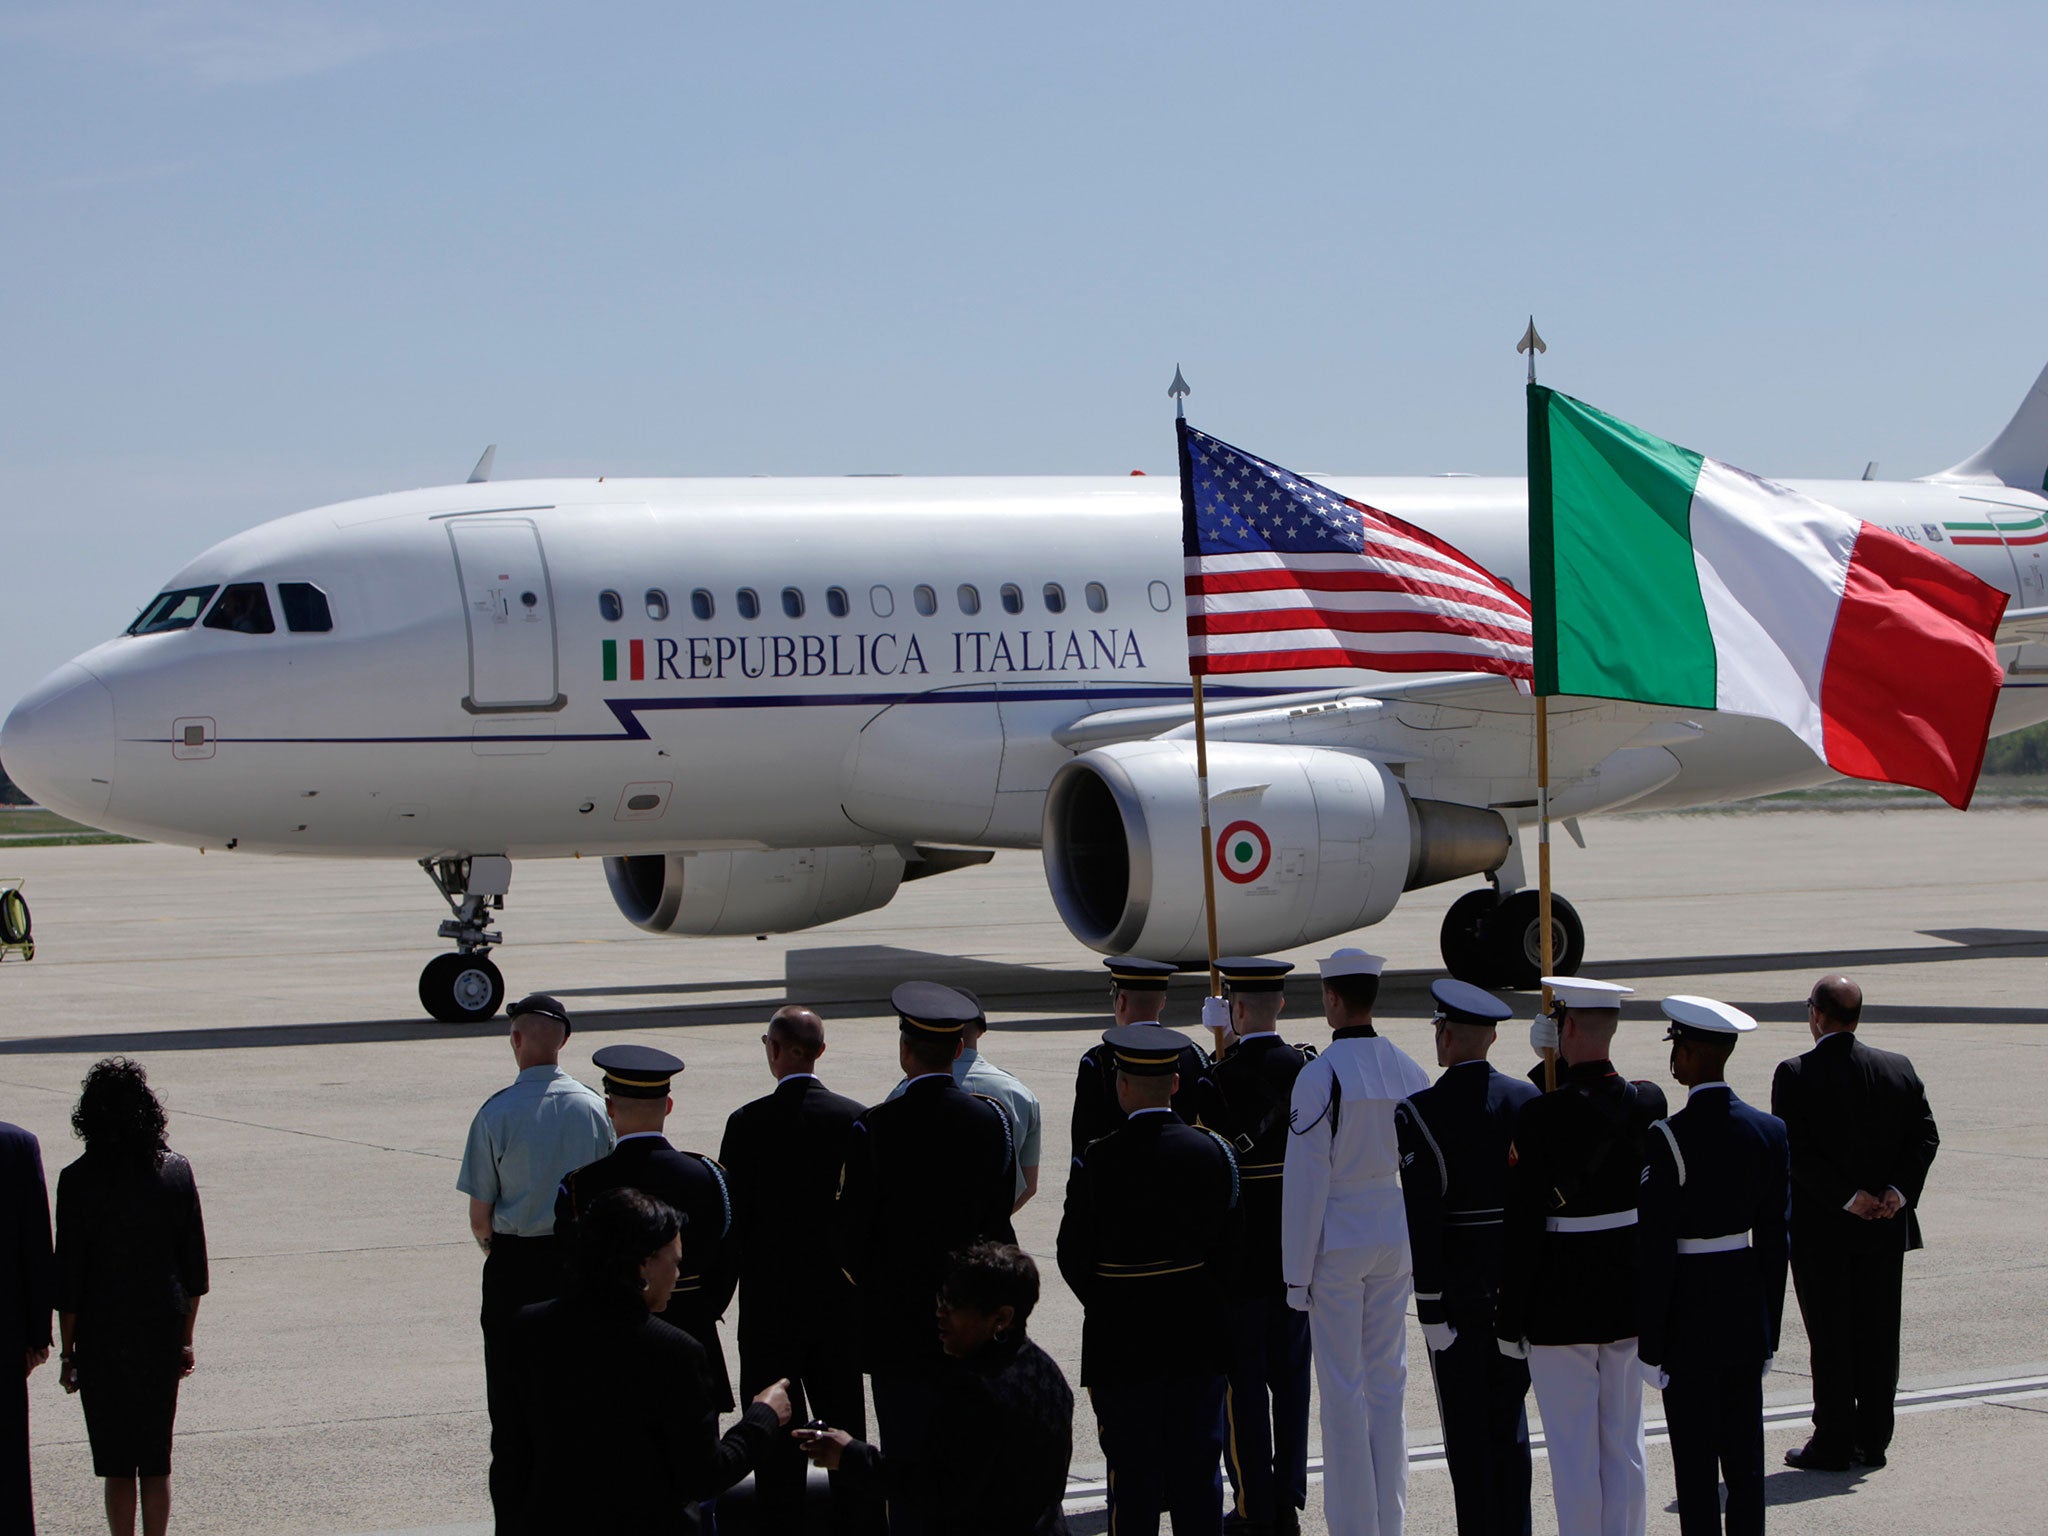 Italian Prime Minister Silvio Berlusconi arrives in his plane at the Andrews Air Force base April 12, 2010 to attend the Nuclear Security Summit in Washington, DC